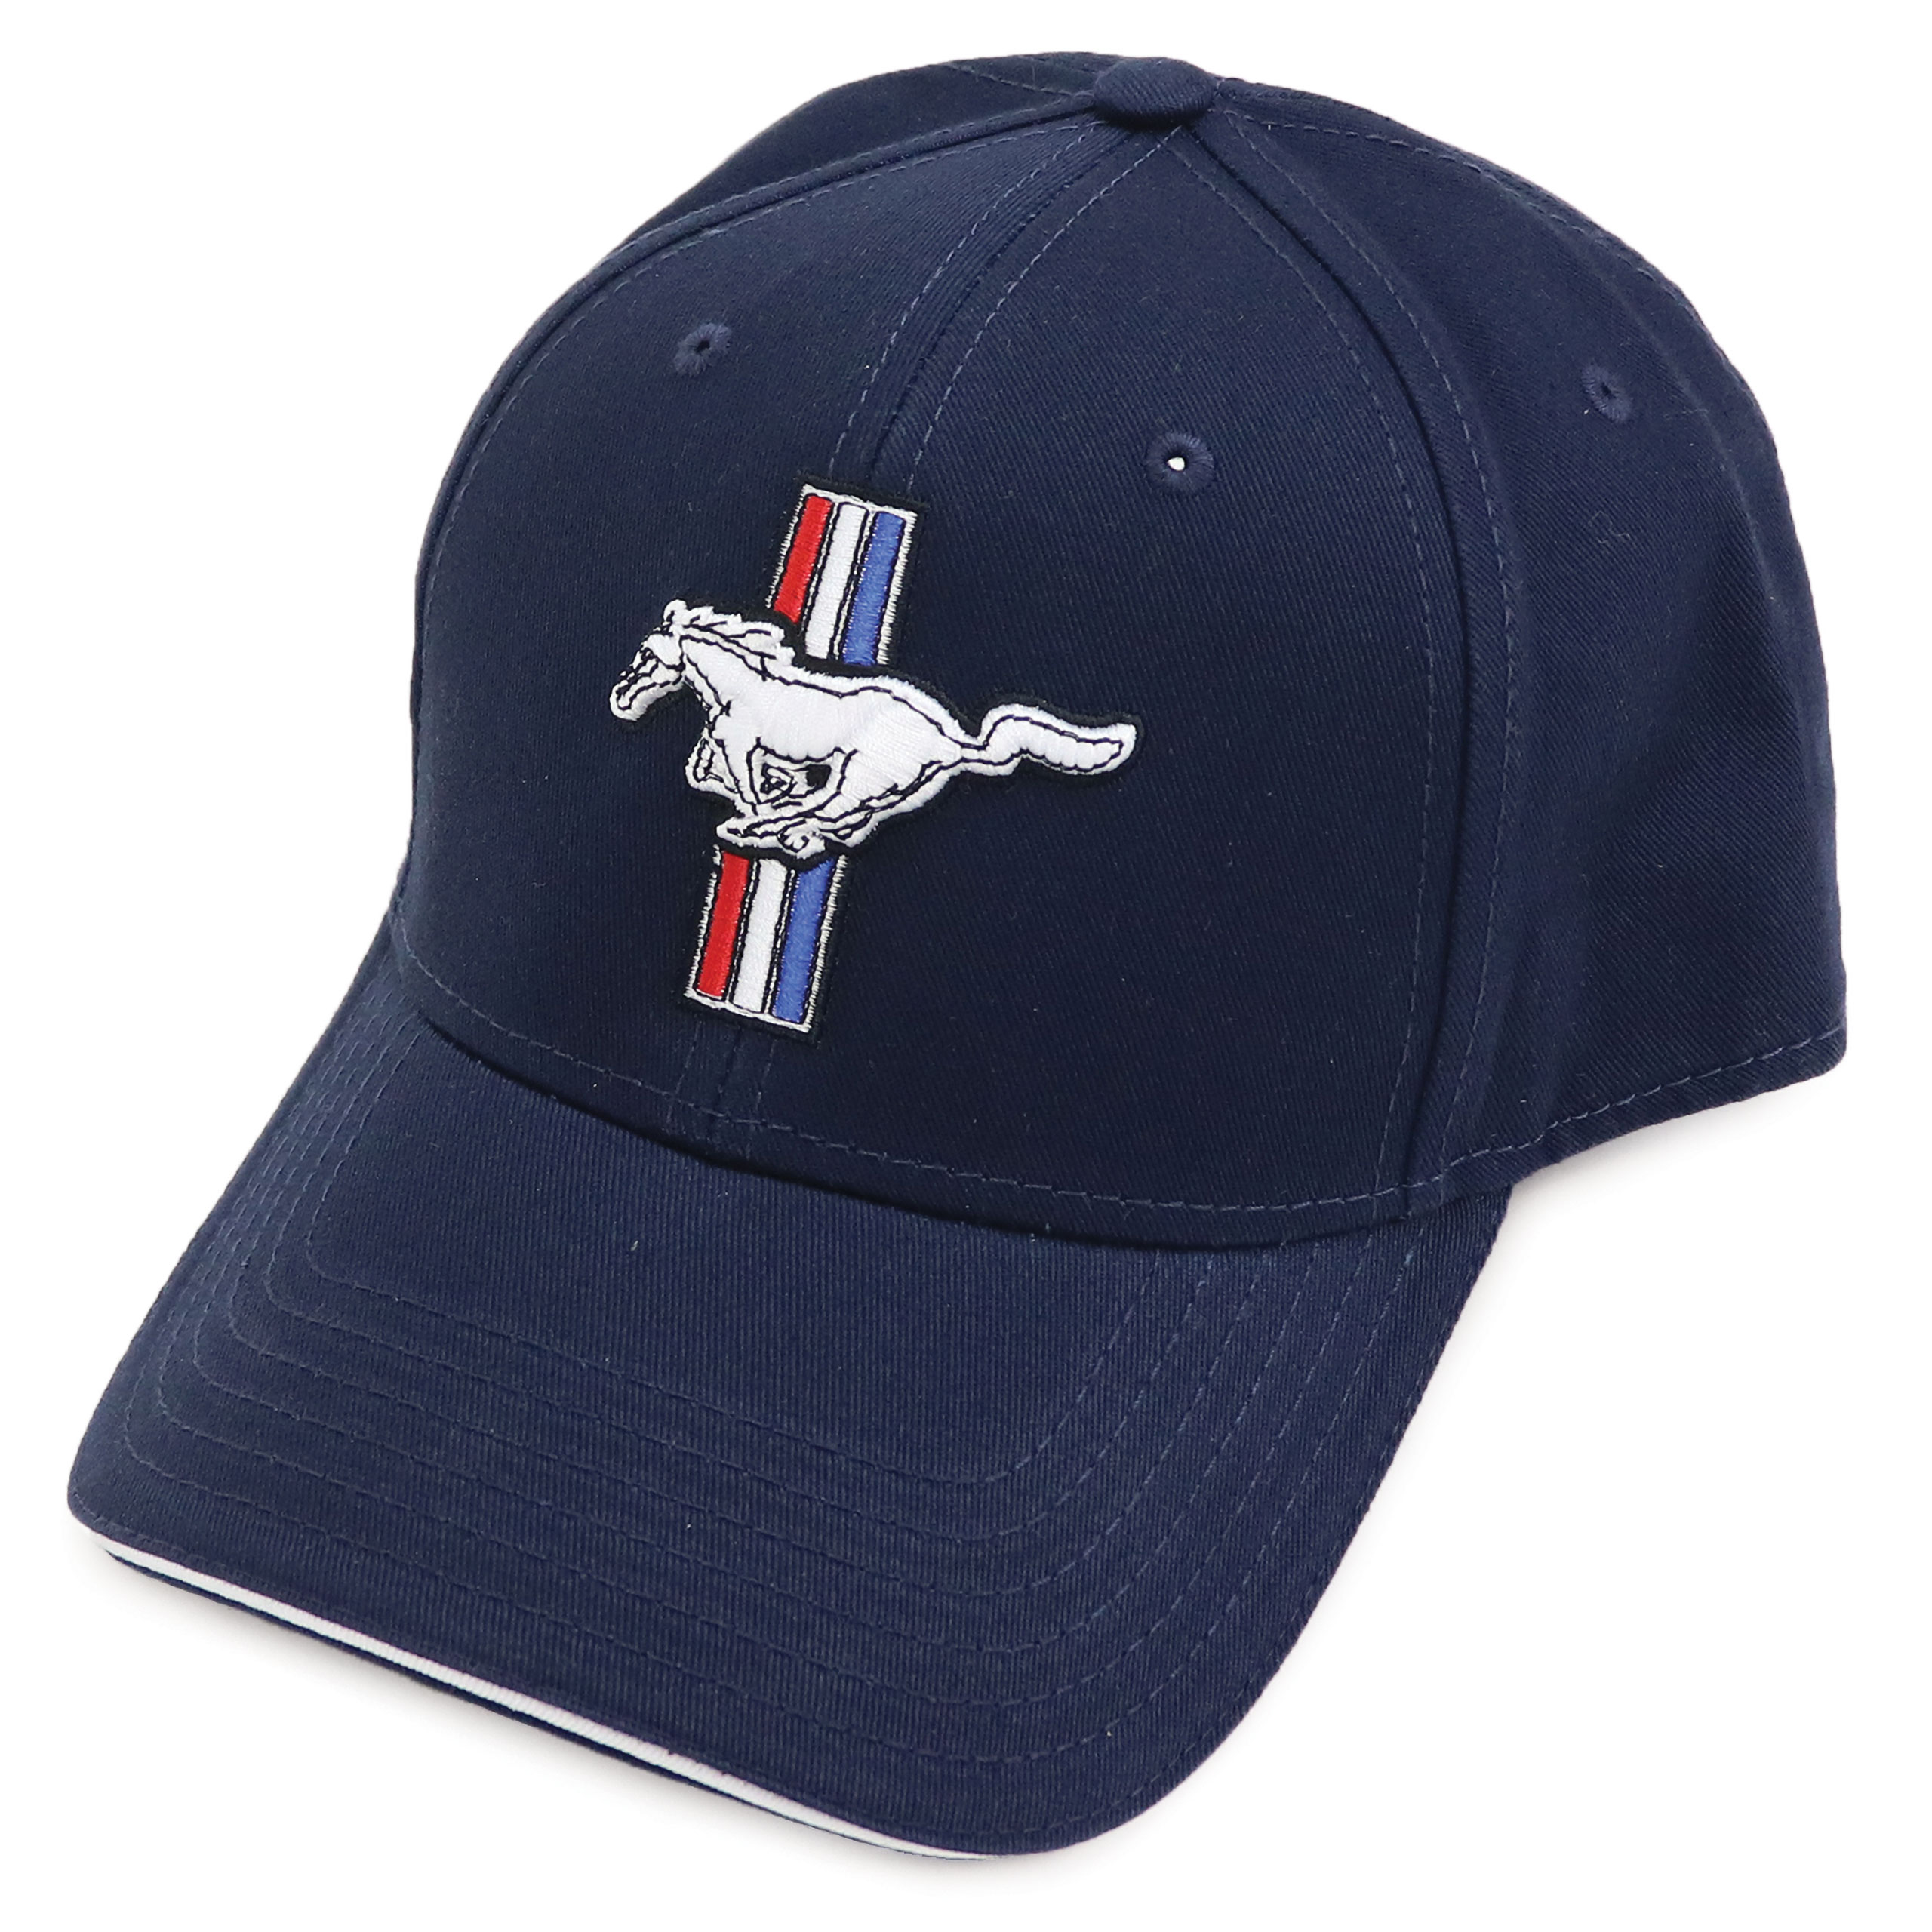 of Blue Logo Auto Mustang 1964-2021 Cap Cotton W/Pony Mustang Accessories - Ford America Twill -